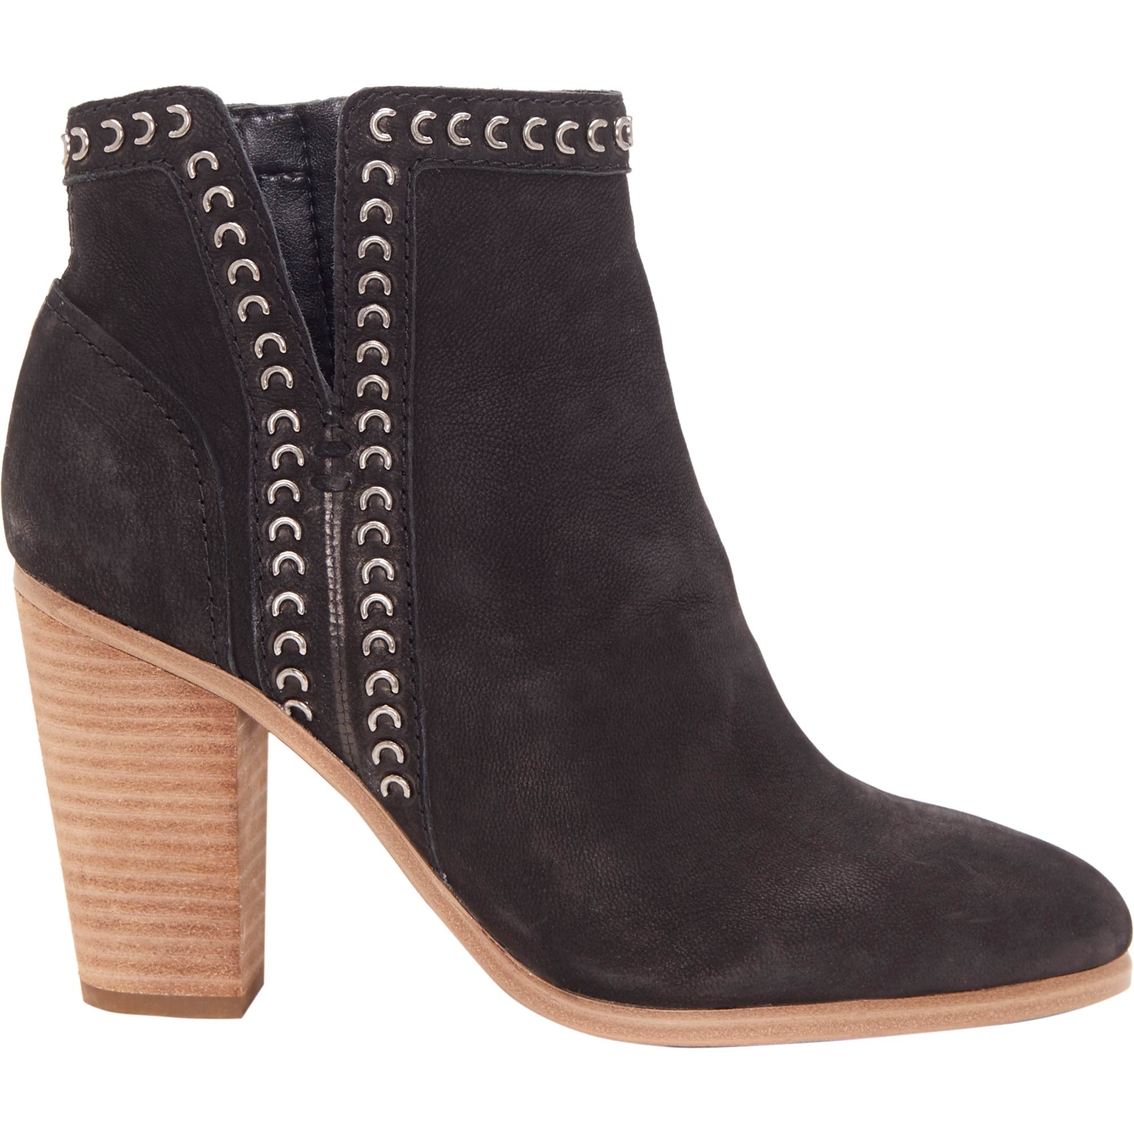 Vince Camuto Finchie Booties | Booties | Shoes | Shop The Exchange